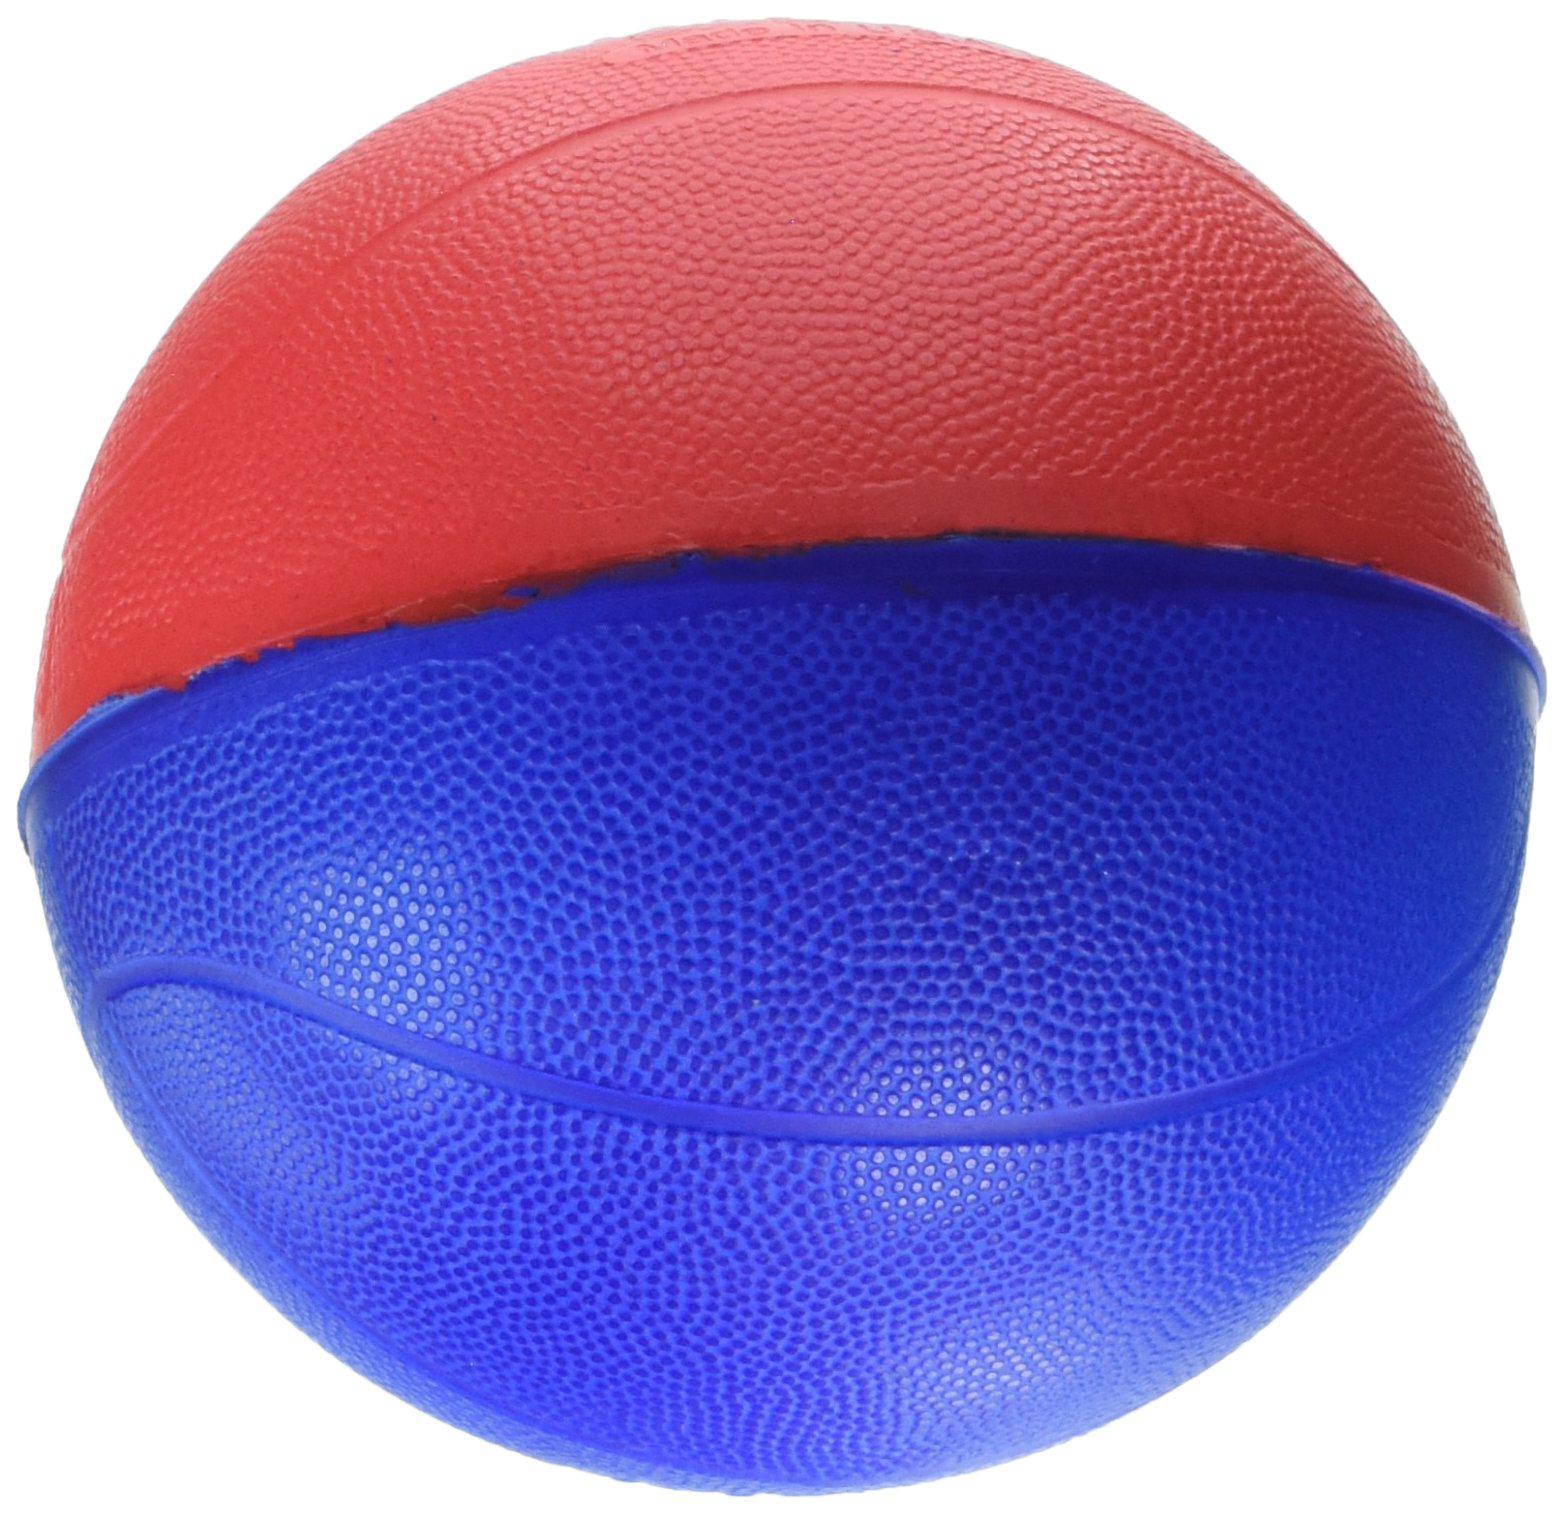 POOF-Slinky poof pro mini basketball, 4 inch, colors may vary kids foam basketball